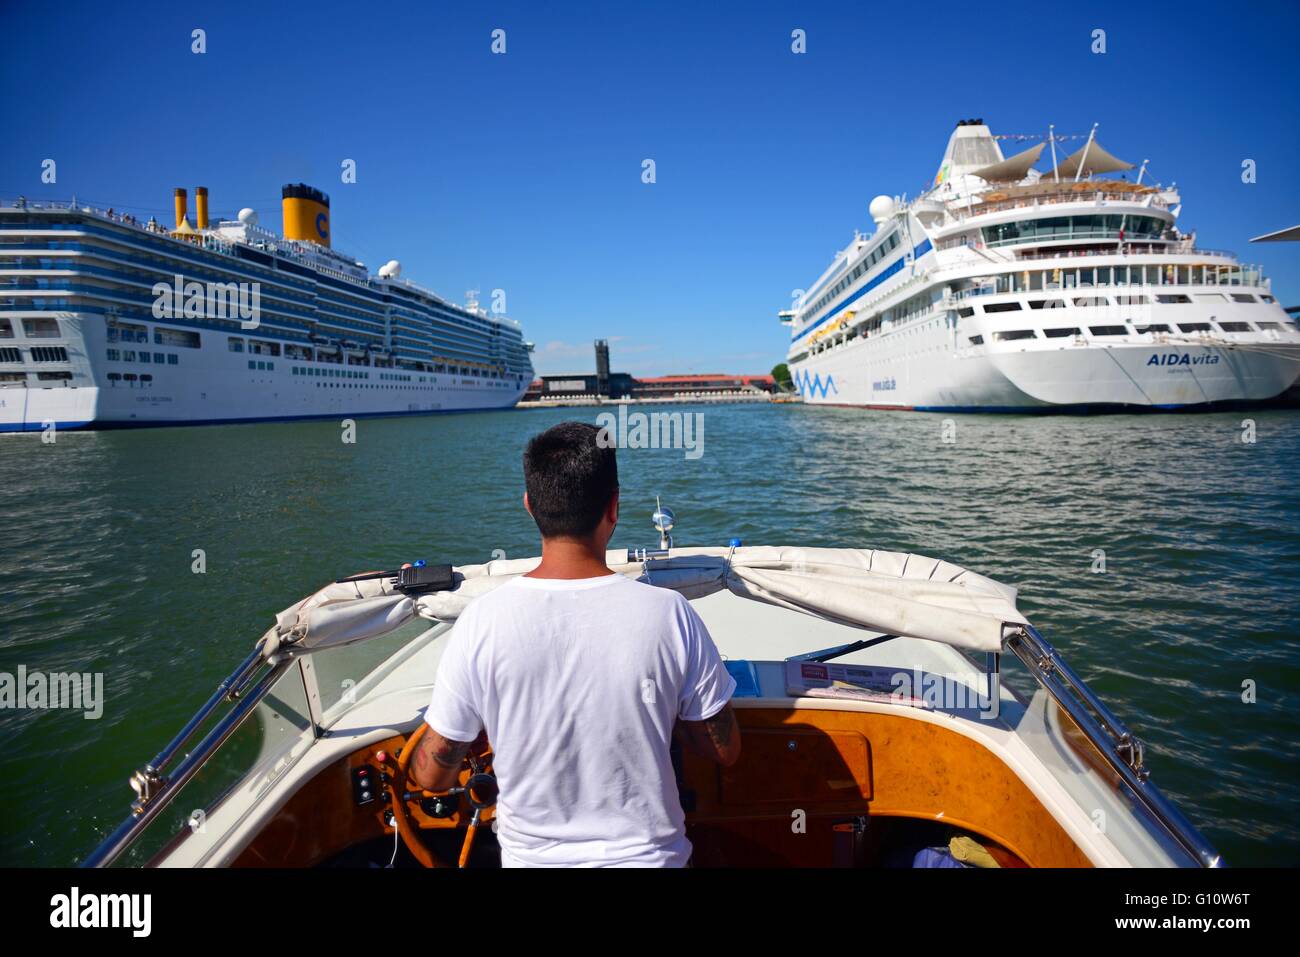 Arriving on taxi boat to the Maritime Station, where cruise ships are moored, Venice, Italy Stock Photo